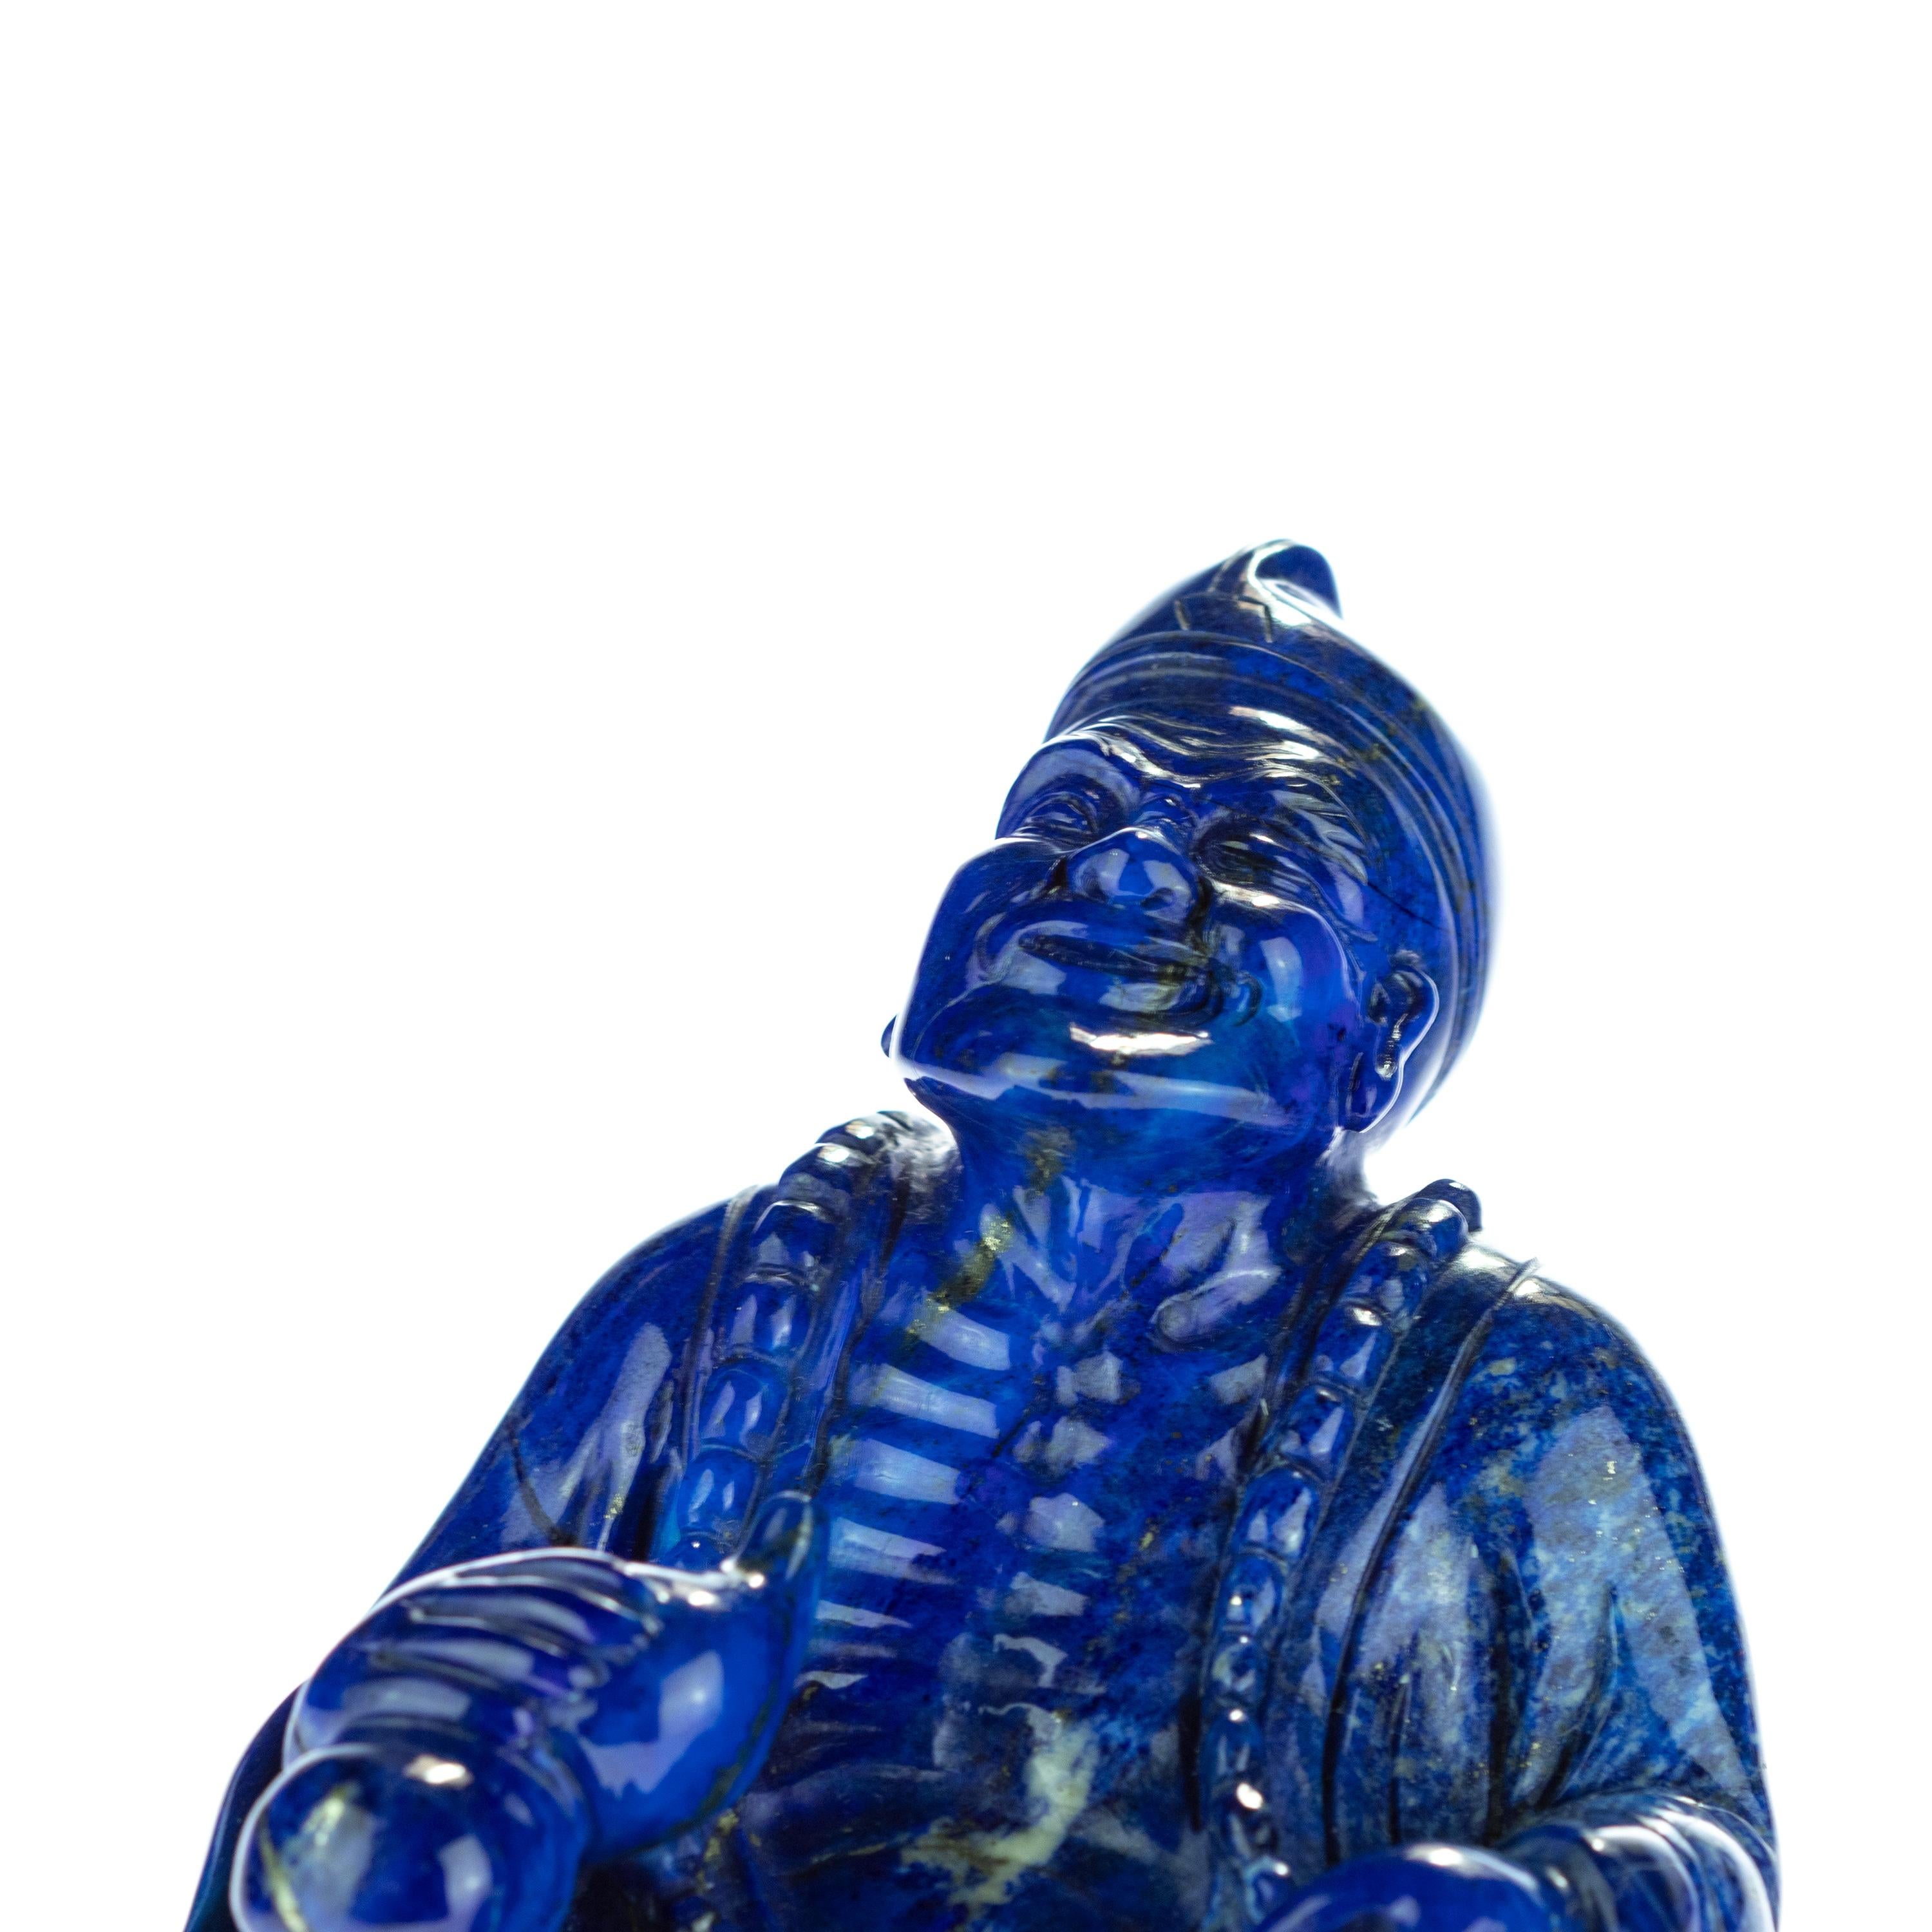 Hand-Carved Lapis Lazuli Natural Blue Wise Buddha Carved Gemstone Asian Art Statue Sculpture For Sale